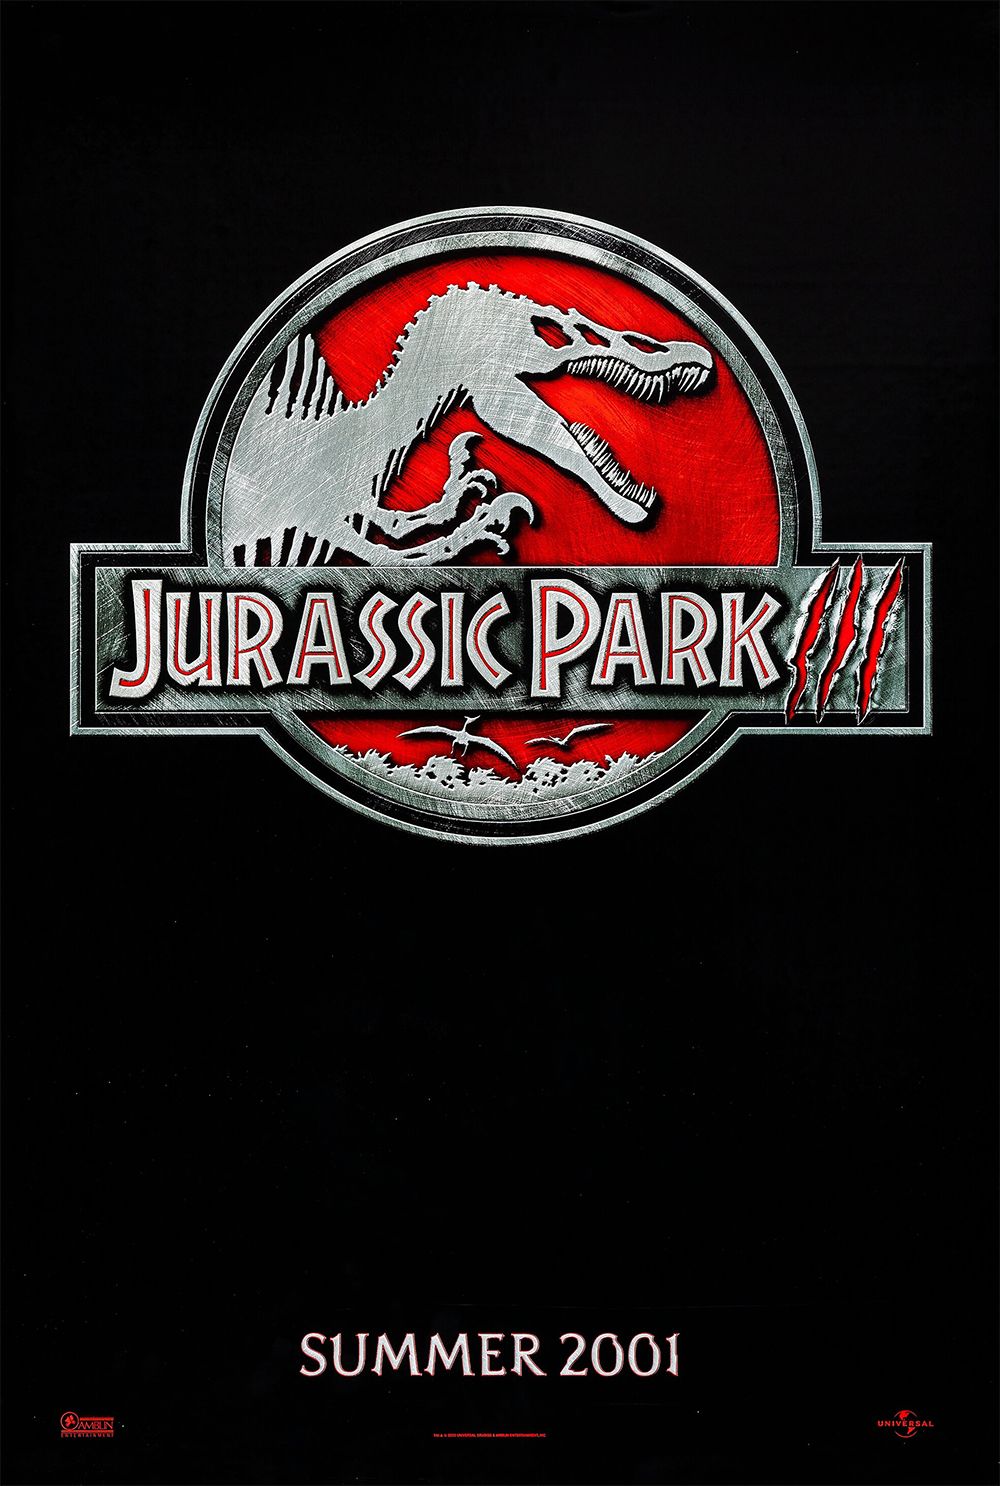 The 10 Best Jurassic Park Movie Posters Ranked